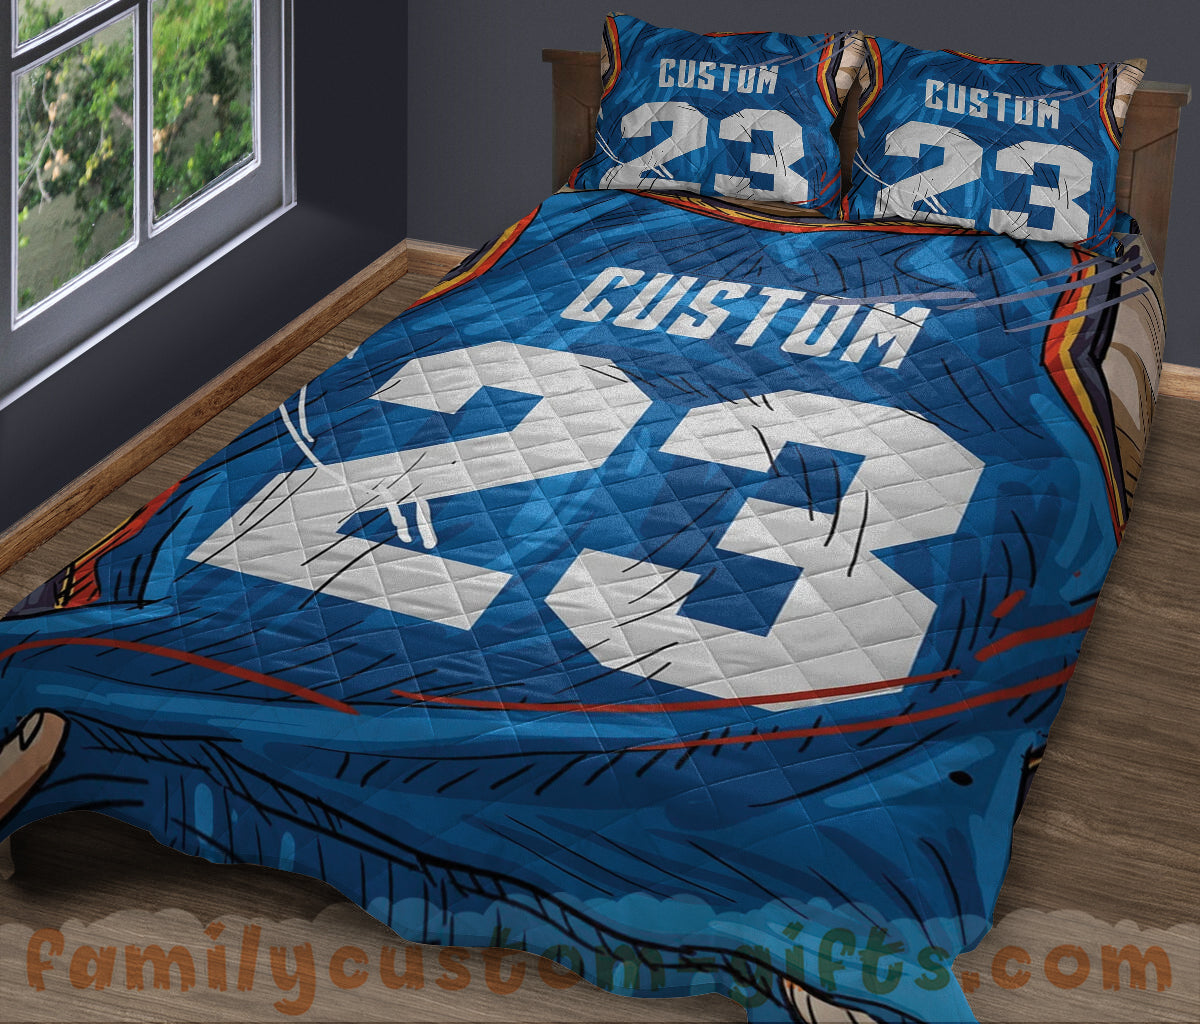 Custom Quilt Sets Oklahoma City Jersey Personalized Basketball Premium Quilt Bedding for Men Women